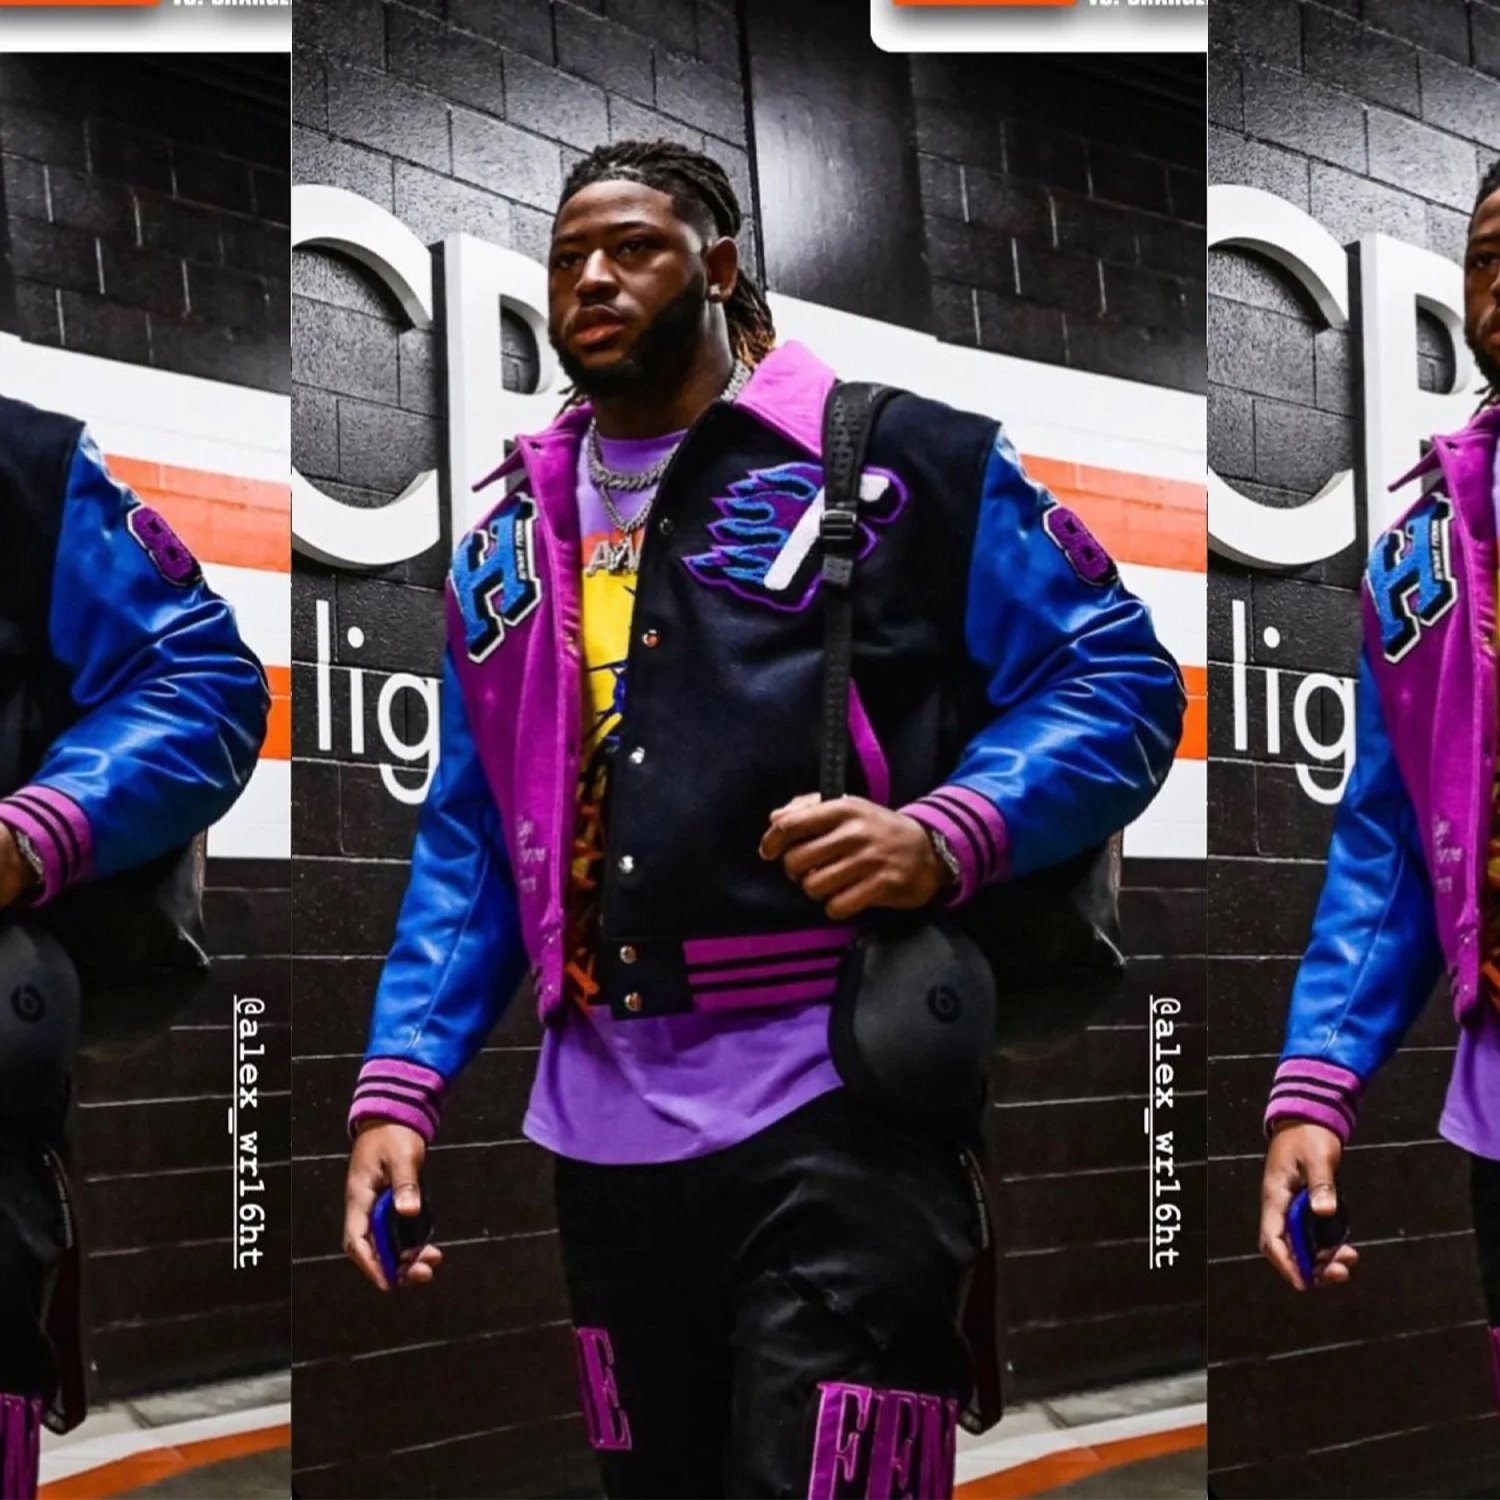 Enorm-Gallery-46003-Alex-Wright-Cleveland-Browns-Defensive-End-seen-wearing-the-Homme-Femme-World-Champs-Letterman-Jacket-and-Letterman-Denim-1665996020-634d14f4542a5.jpeg